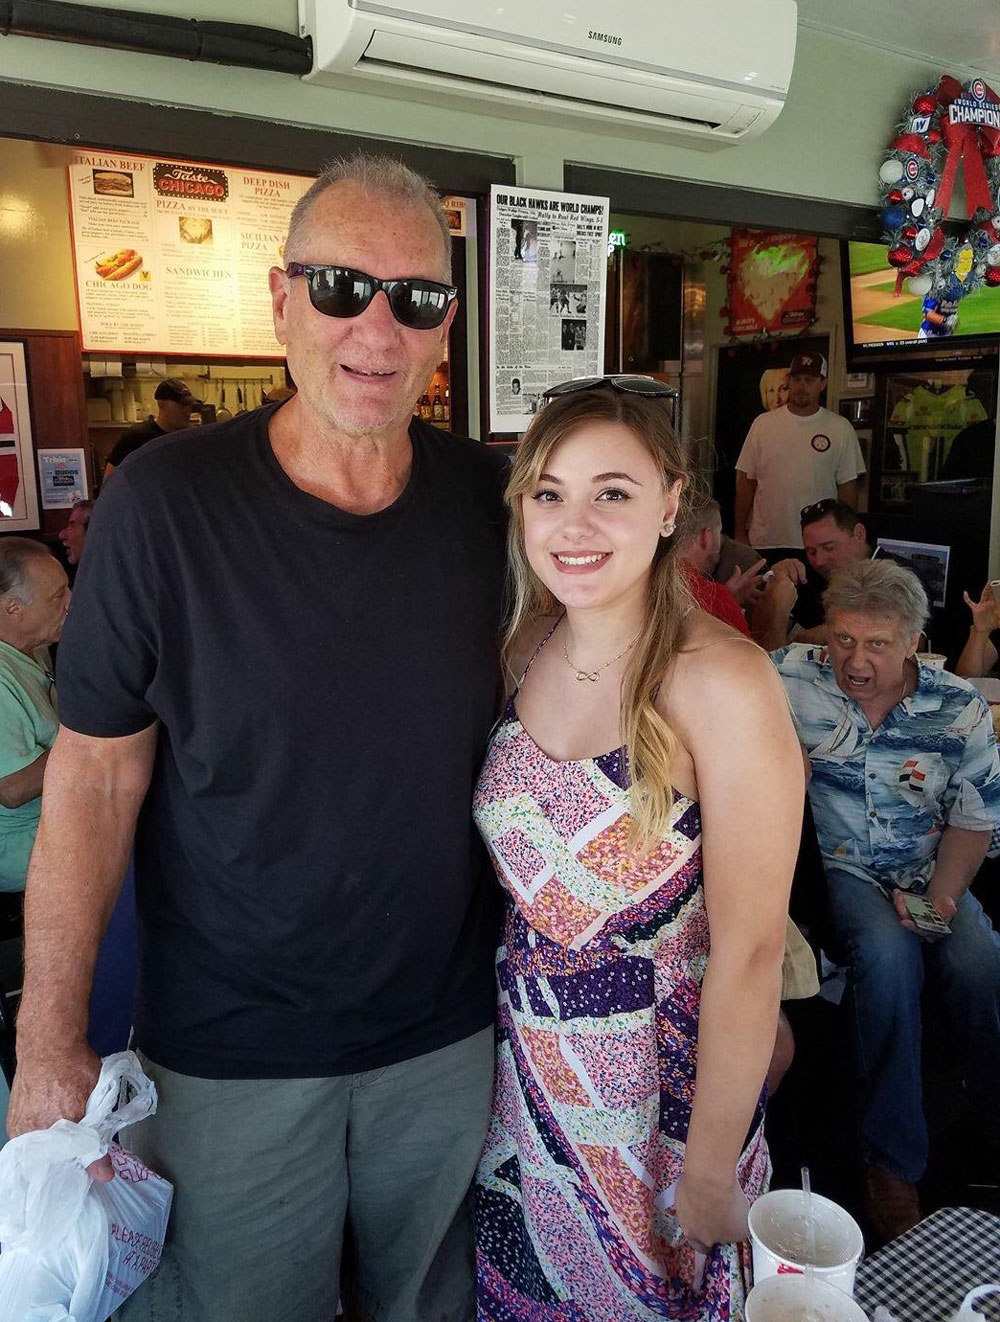 My friend met Ed O'Neill and the guy behind her can't believe it